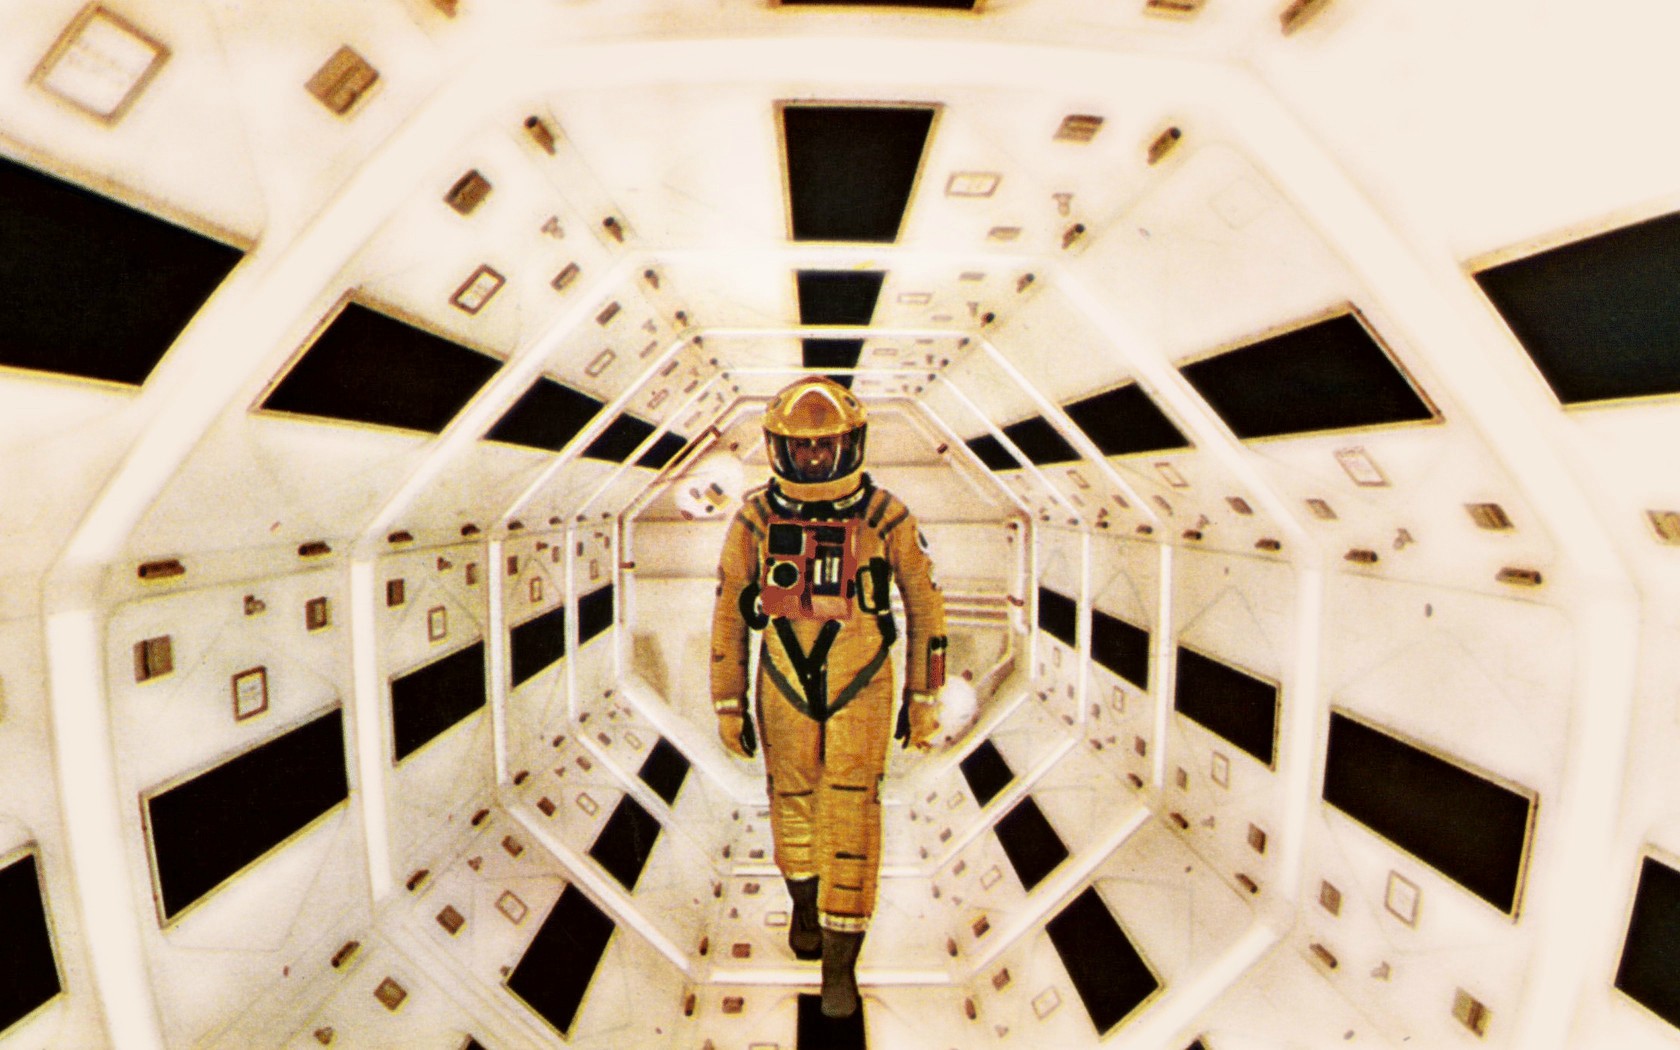 Free download A Space Odyssey[1920x1080 wallpapers [1680x1050] for your